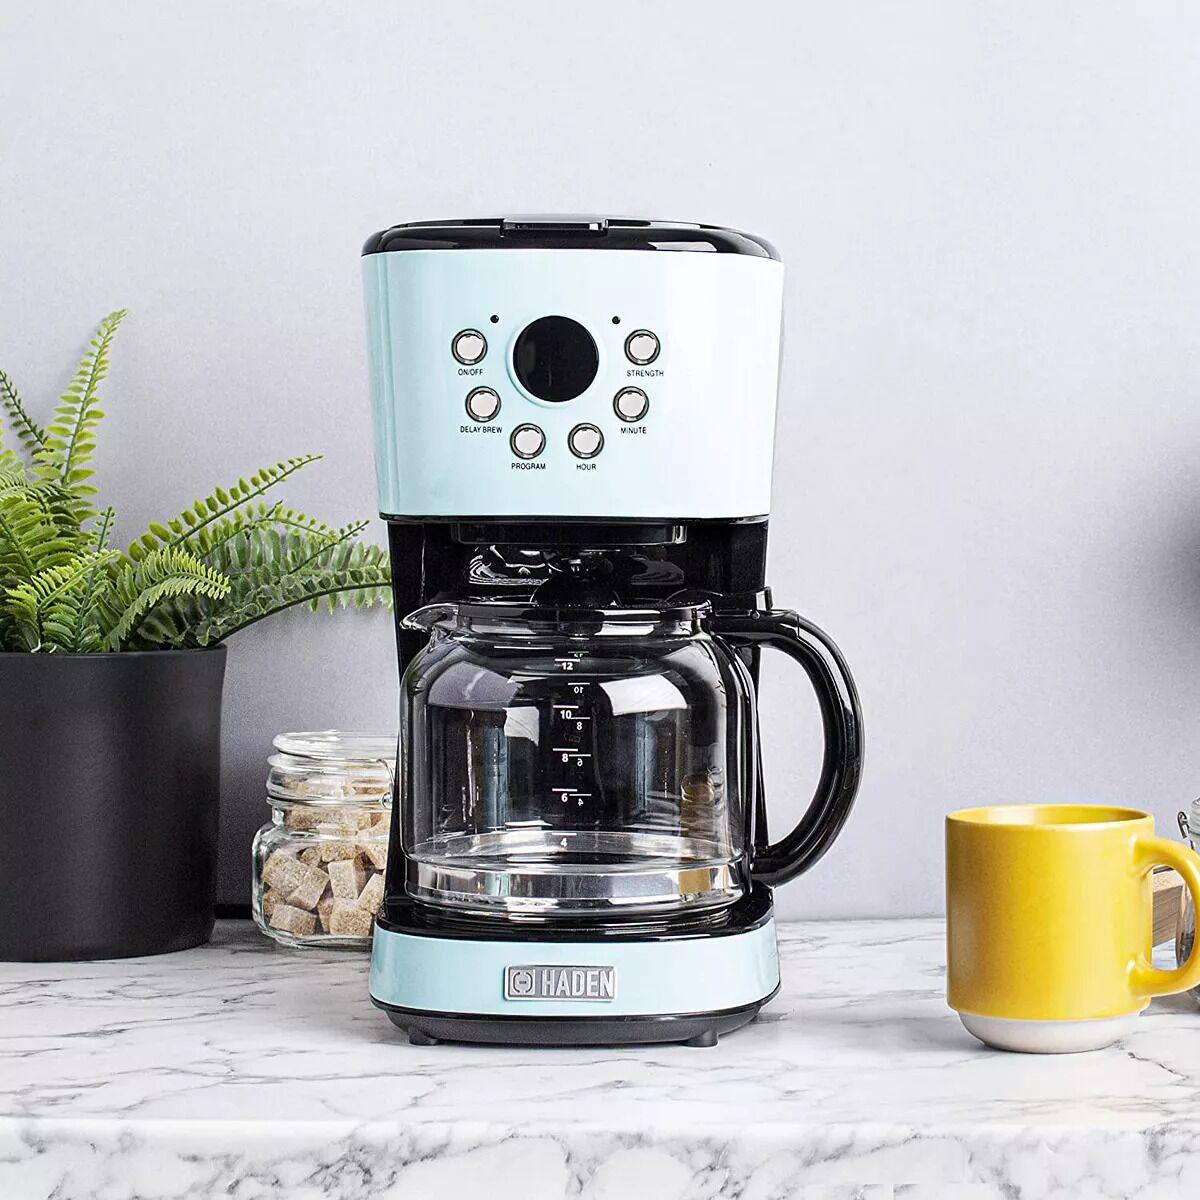 The Best Retro Appliances: Our 7 Top Picks – StyleCaster